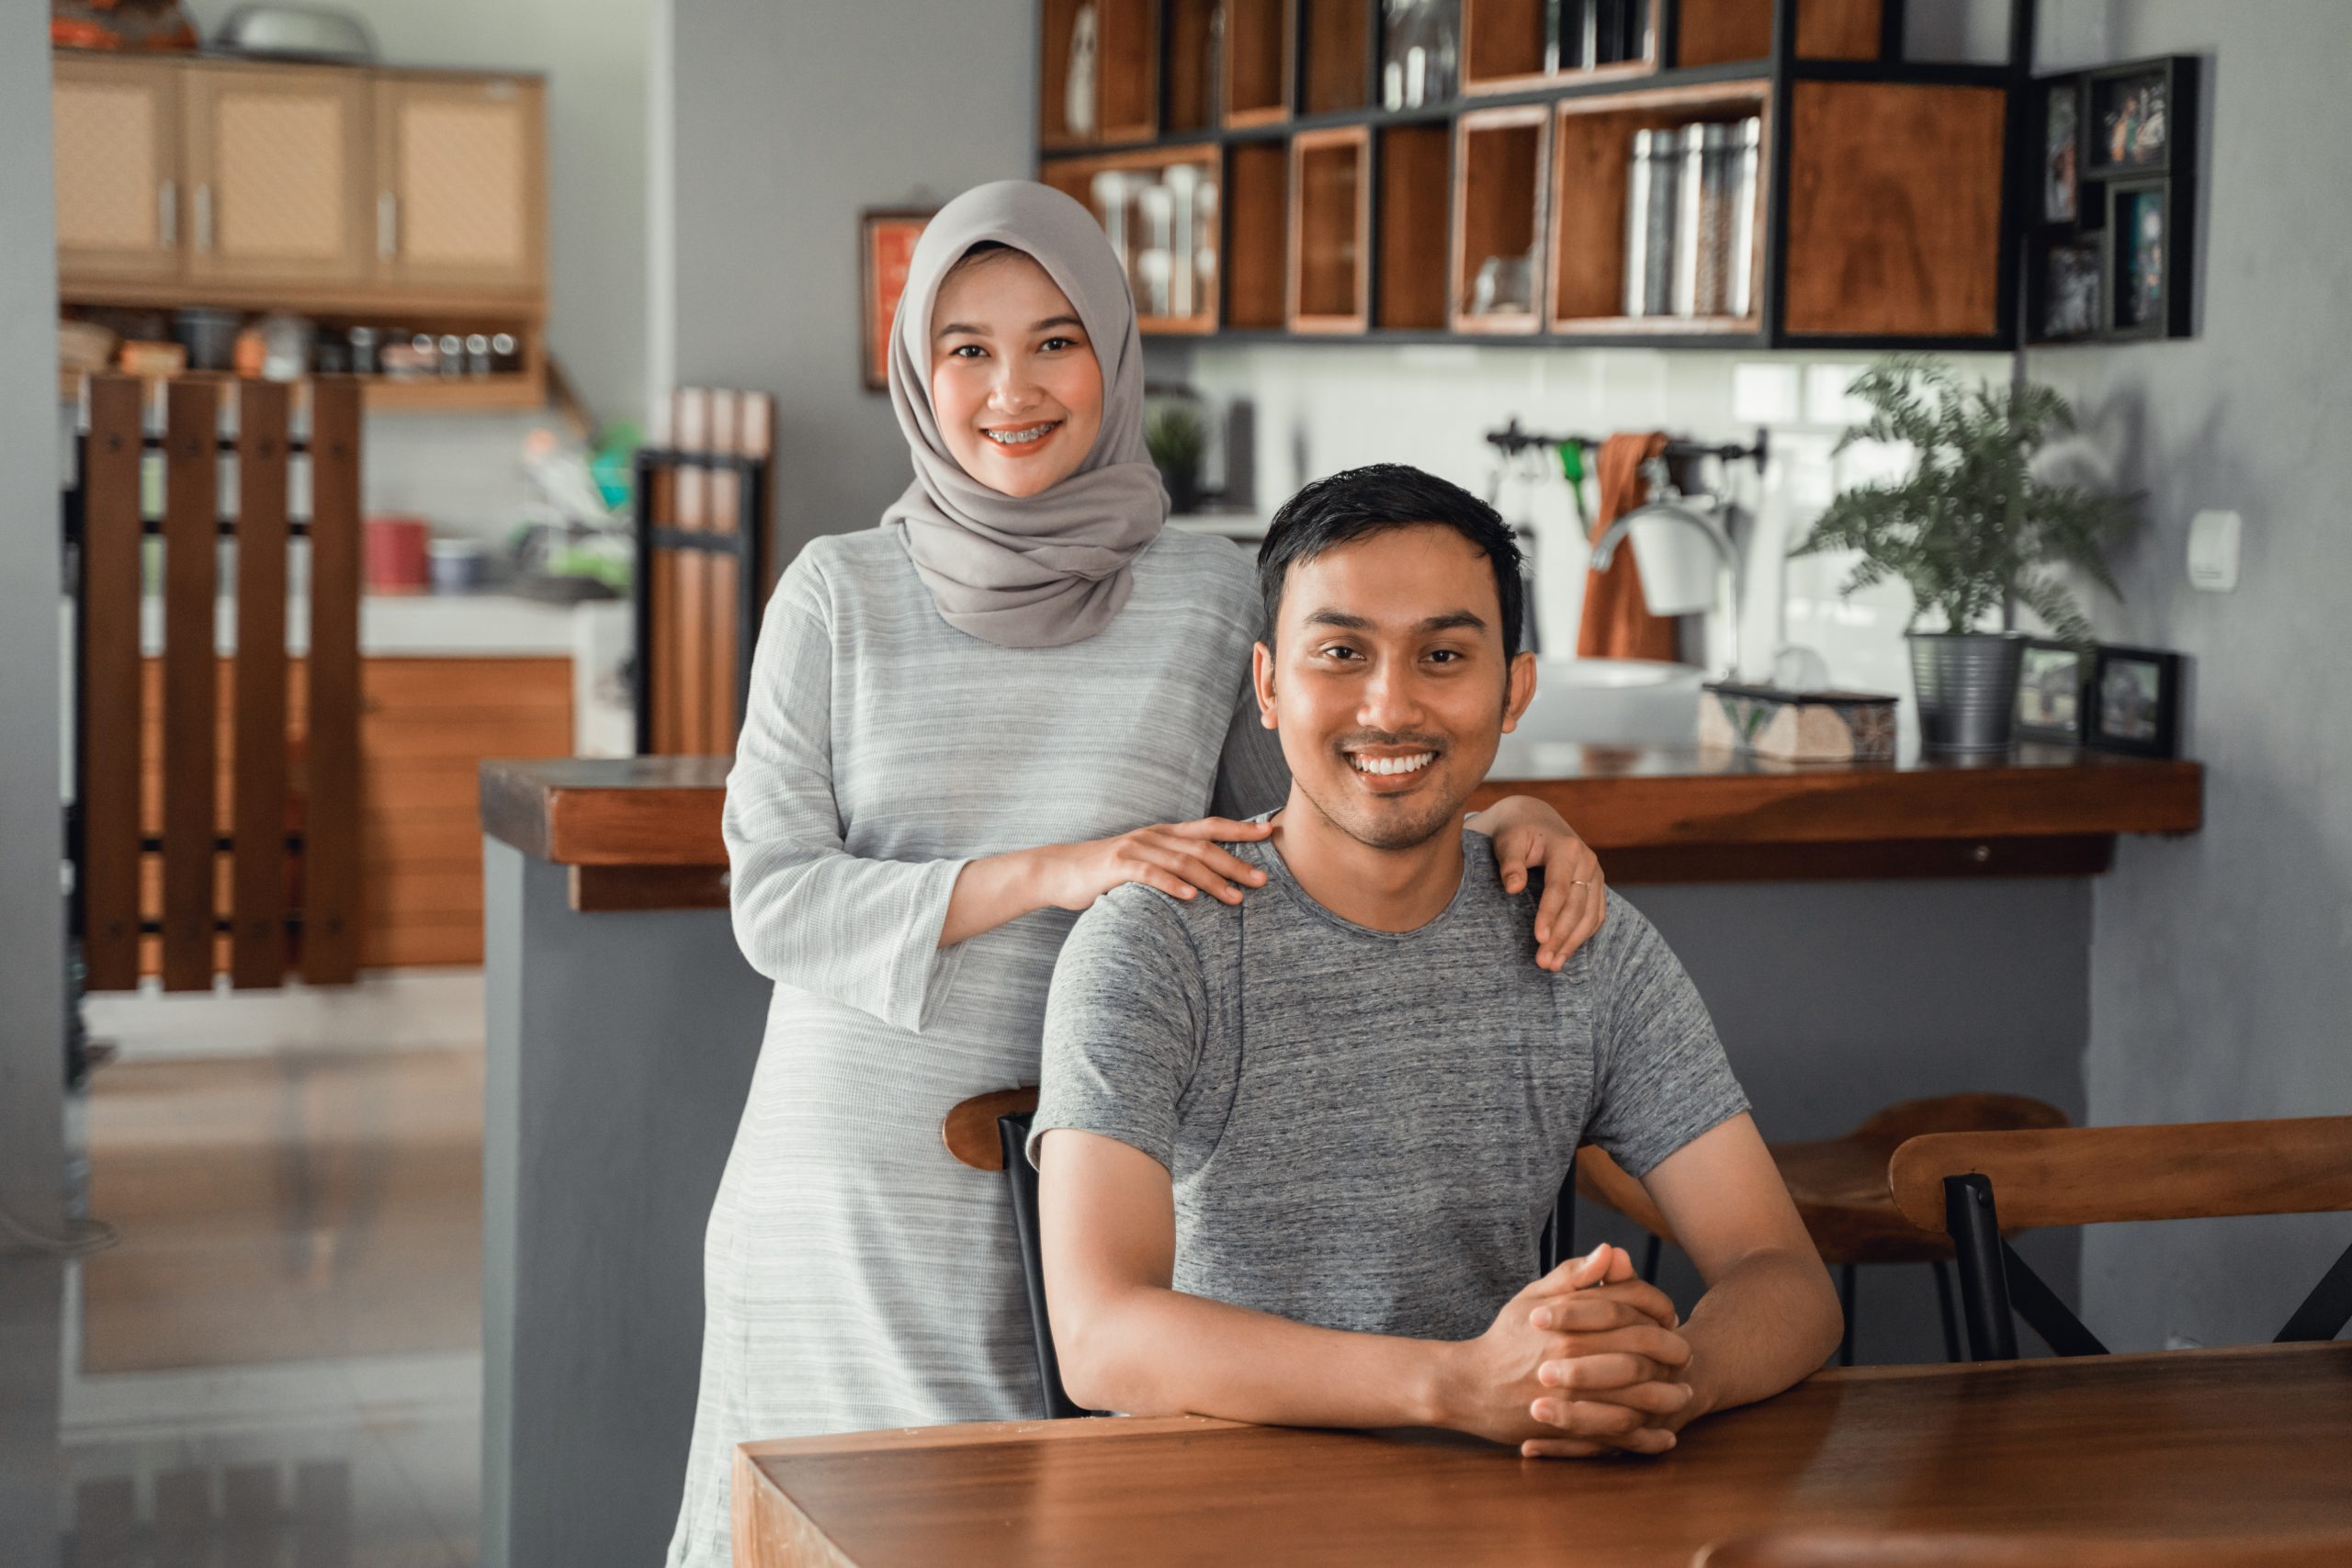 muslim-couple-sitting-dining-room-together-scaled.jpg